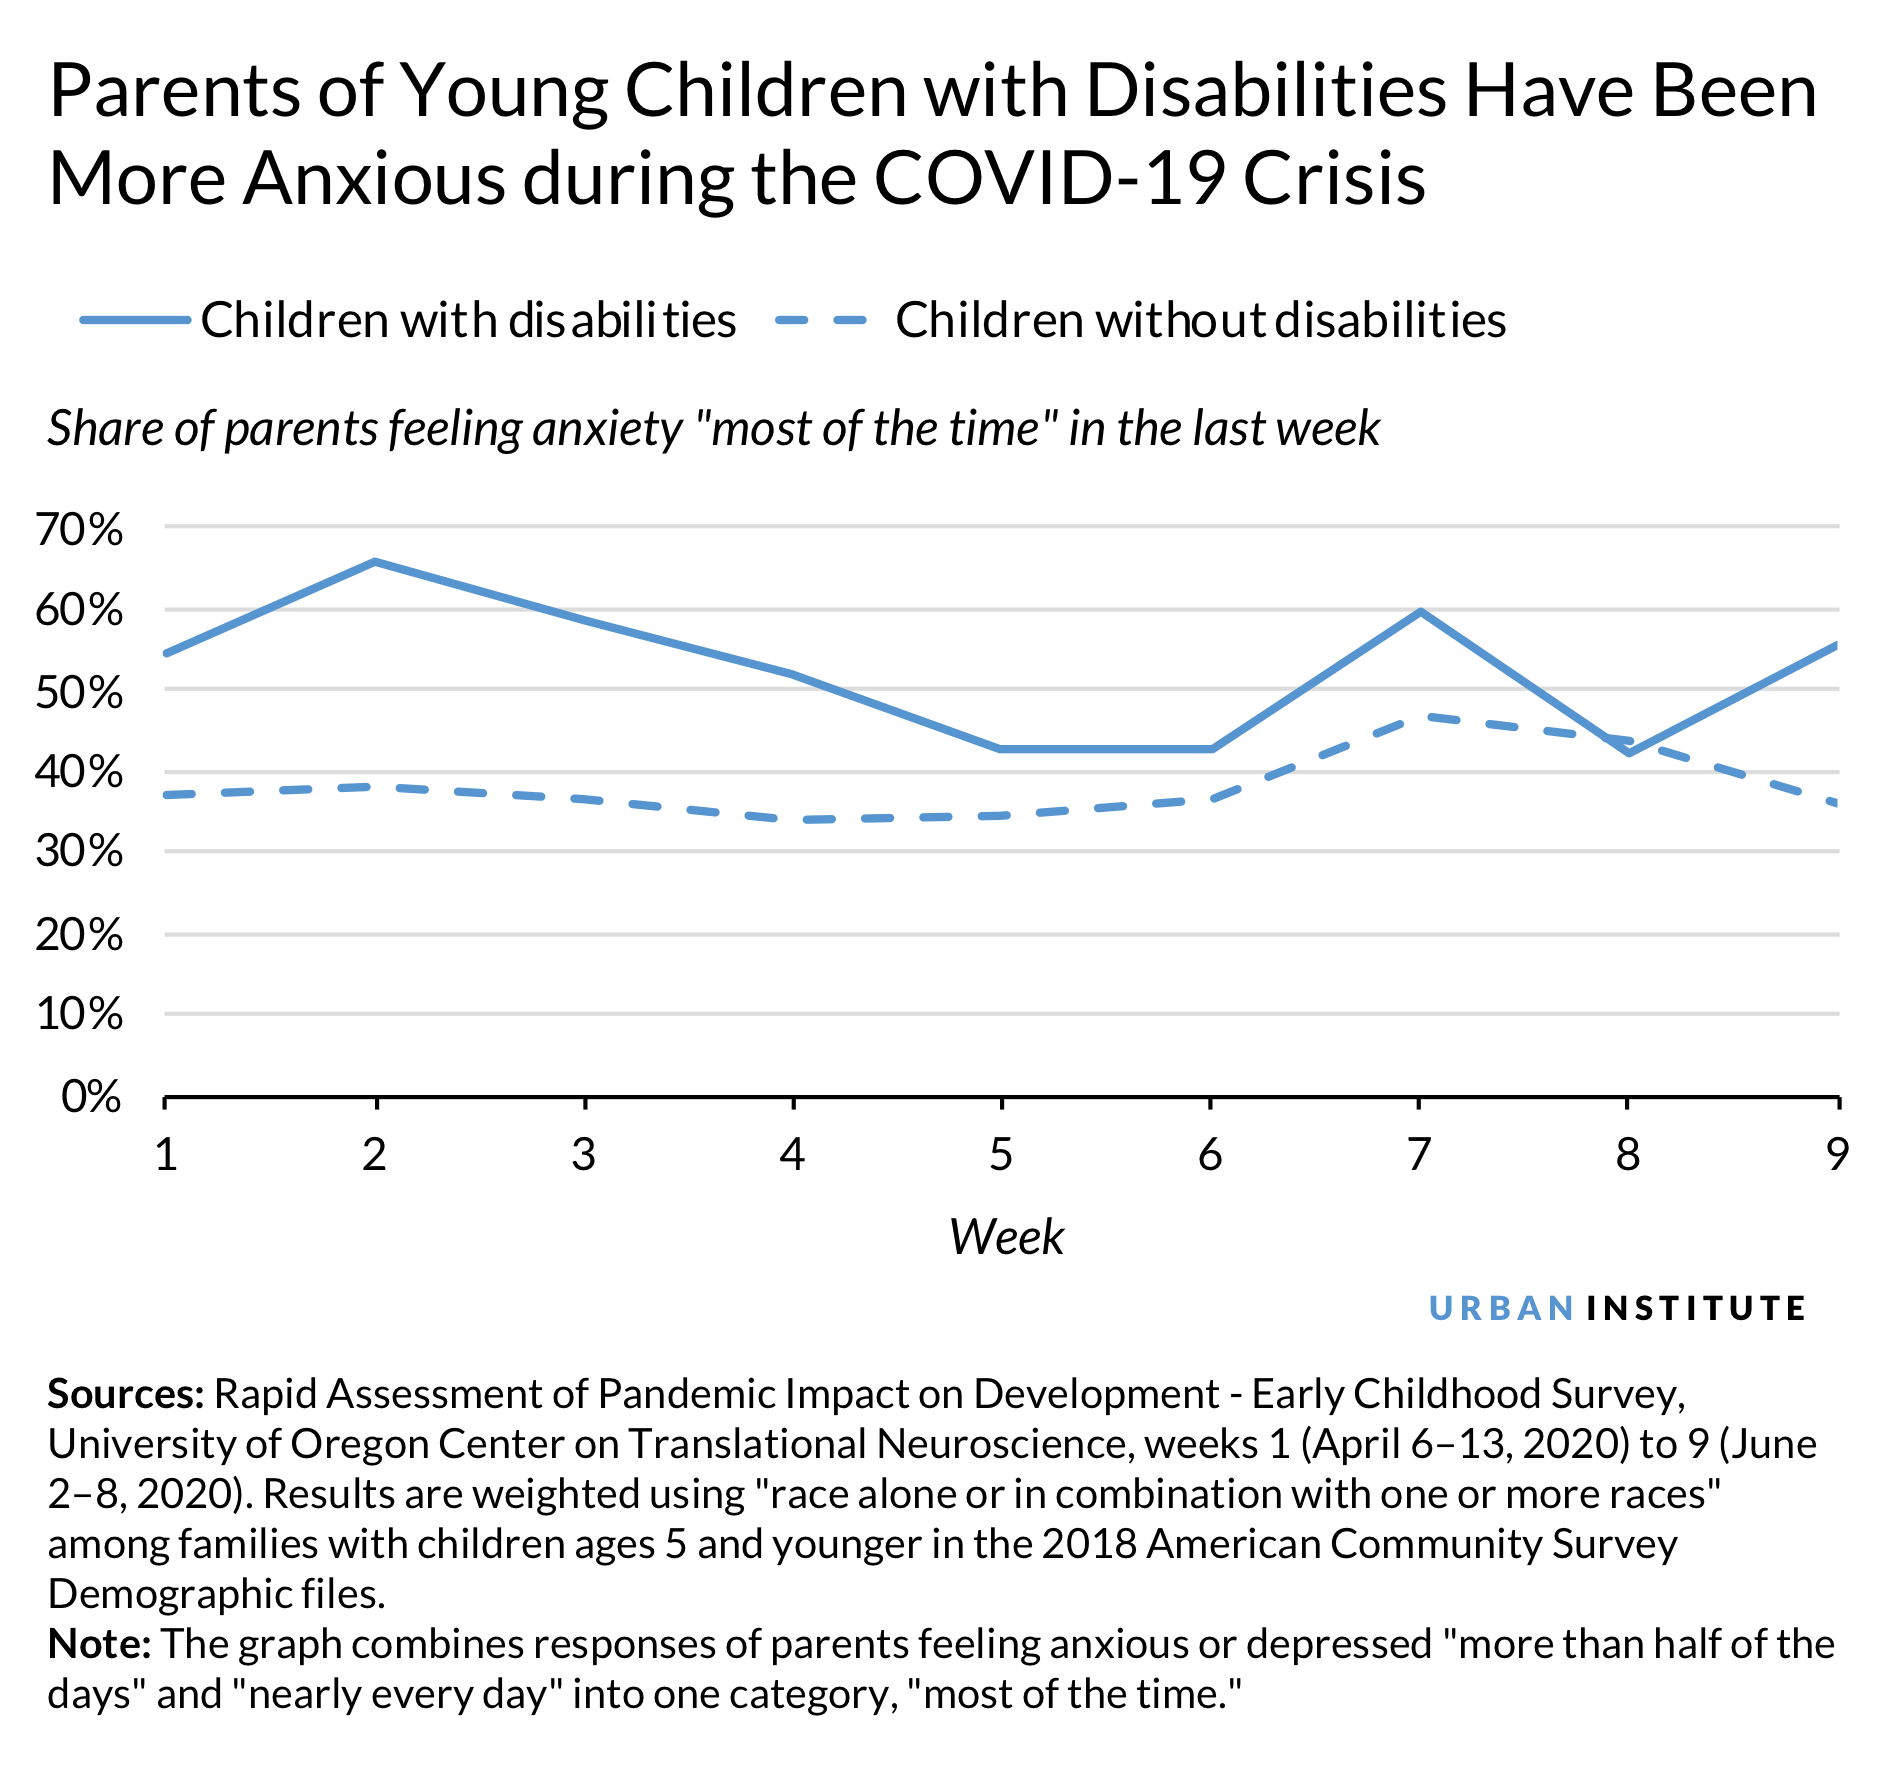 Parents of young kids with disabilities are more anxious during COVID-19